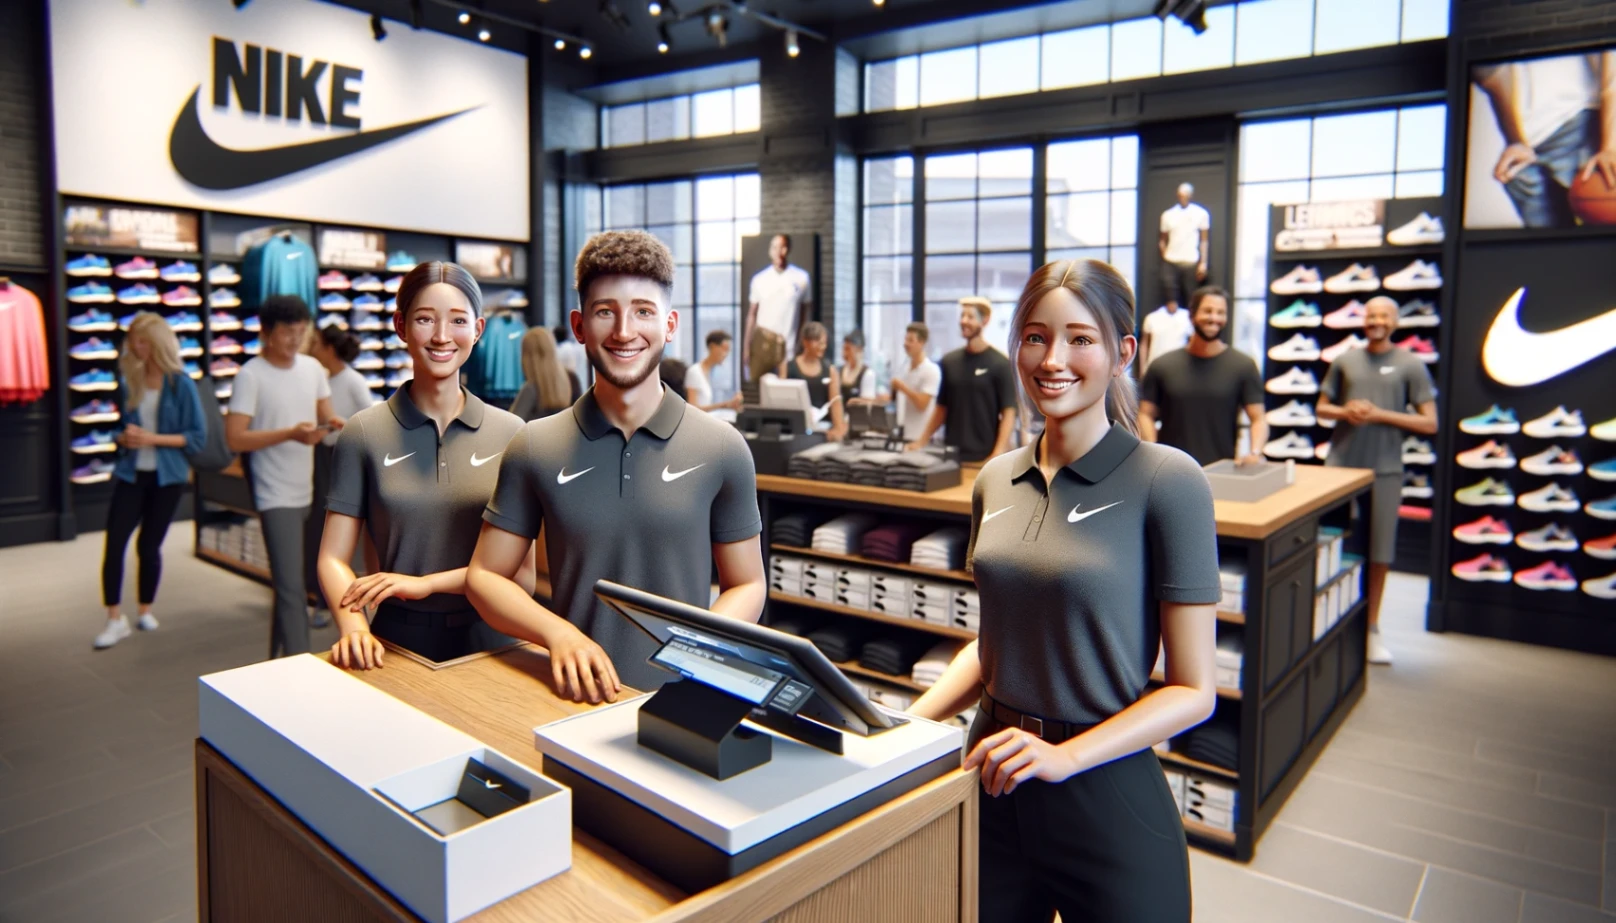 Jobs at Nike: Learn How to Apply